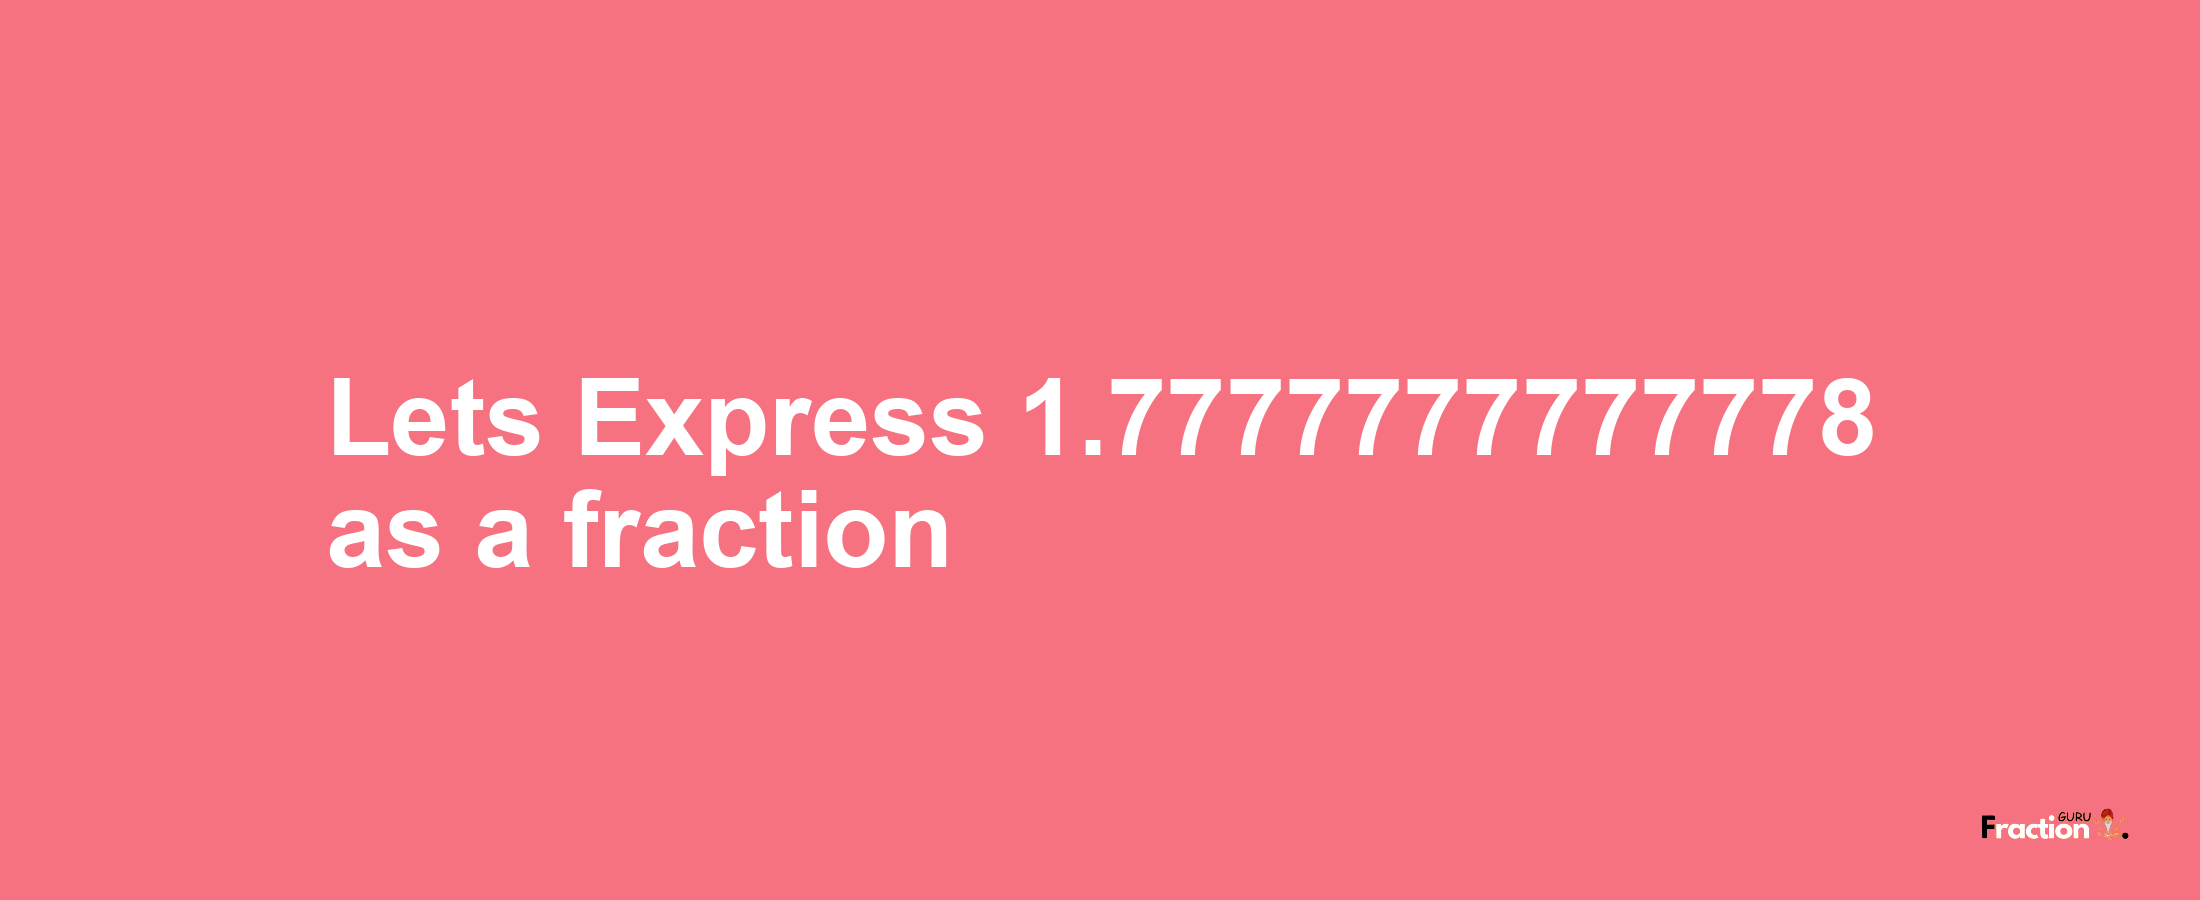 Lets Express 1.7777777777778 as afraction